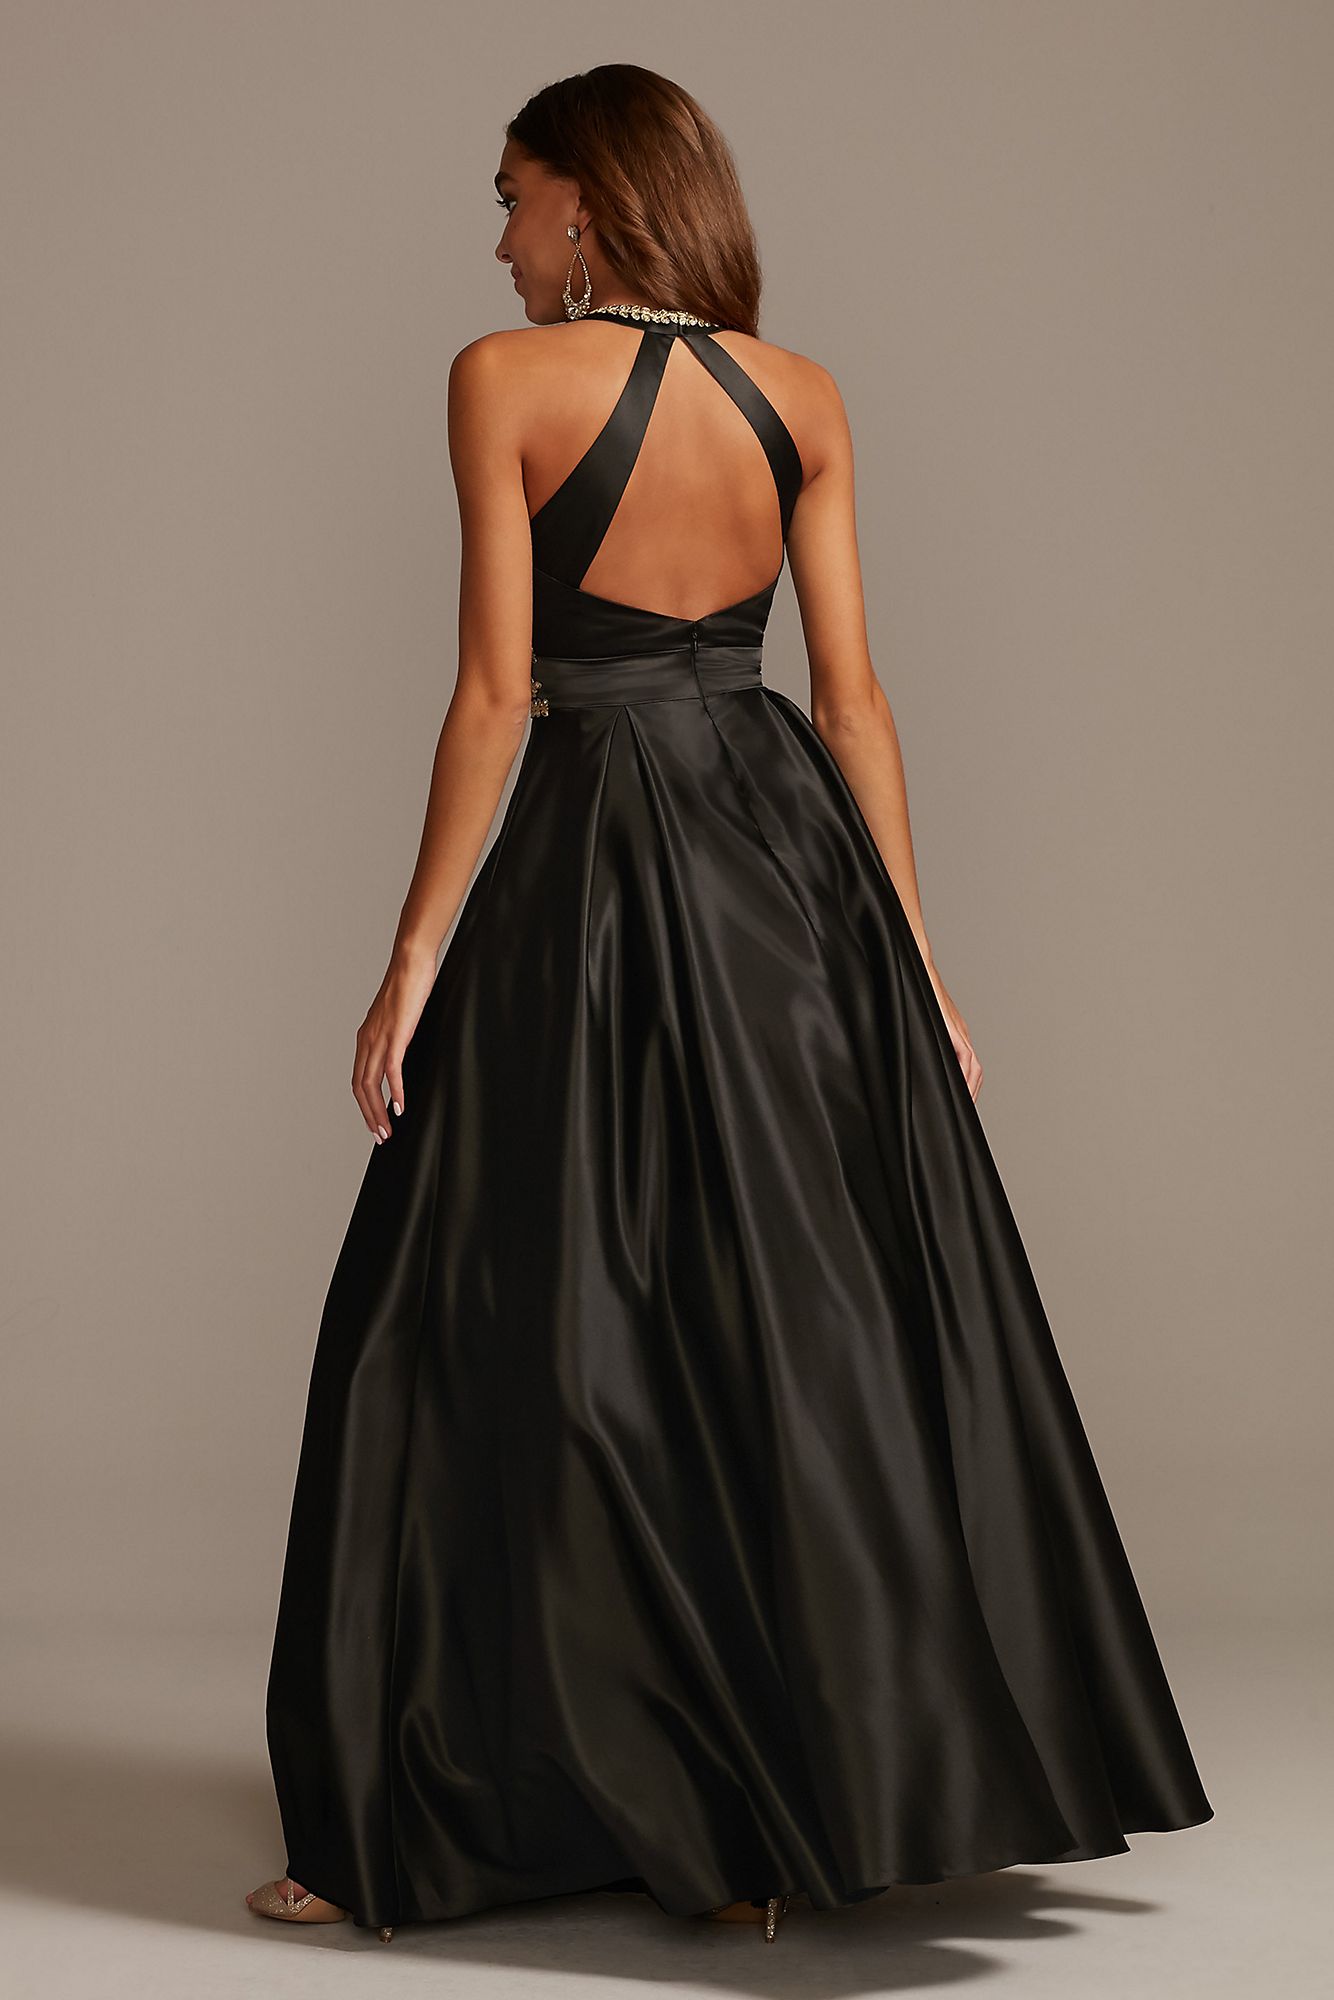 Floral Embellished Long 2096BN Satin Prom Gown with Open Back